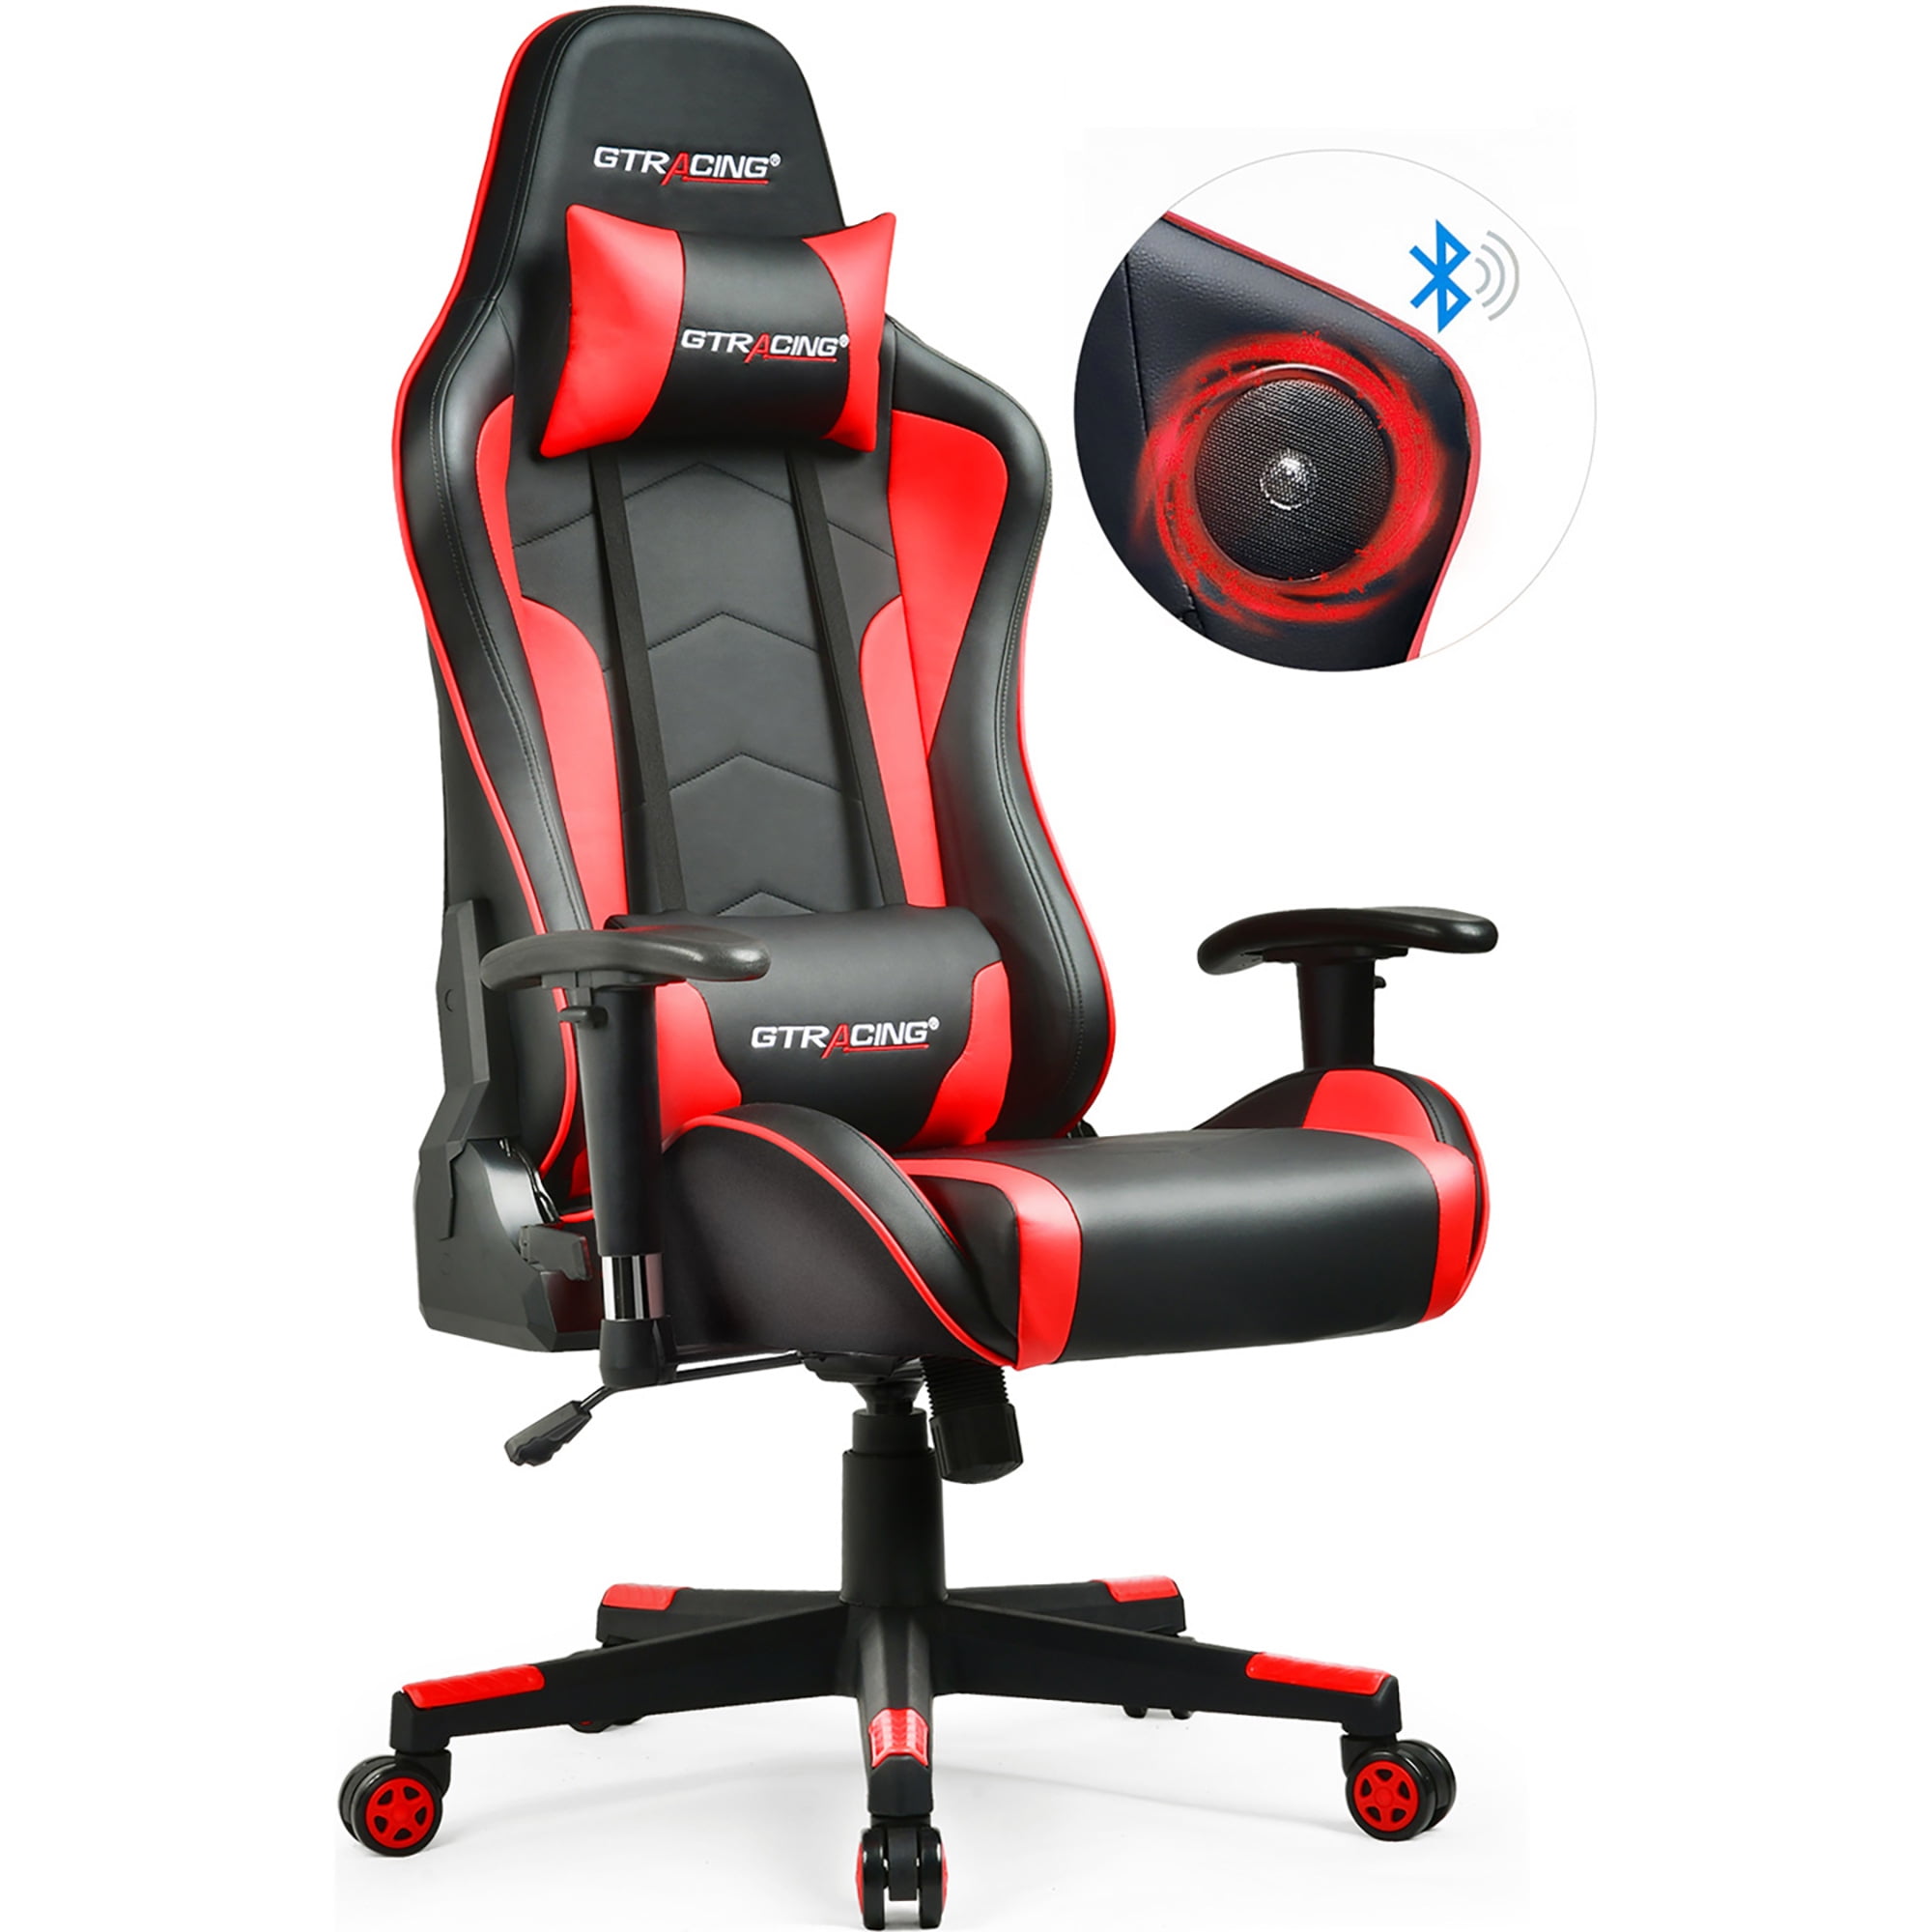 GTRACING Gaming Chair Office Chair with Speakers Bluetooth